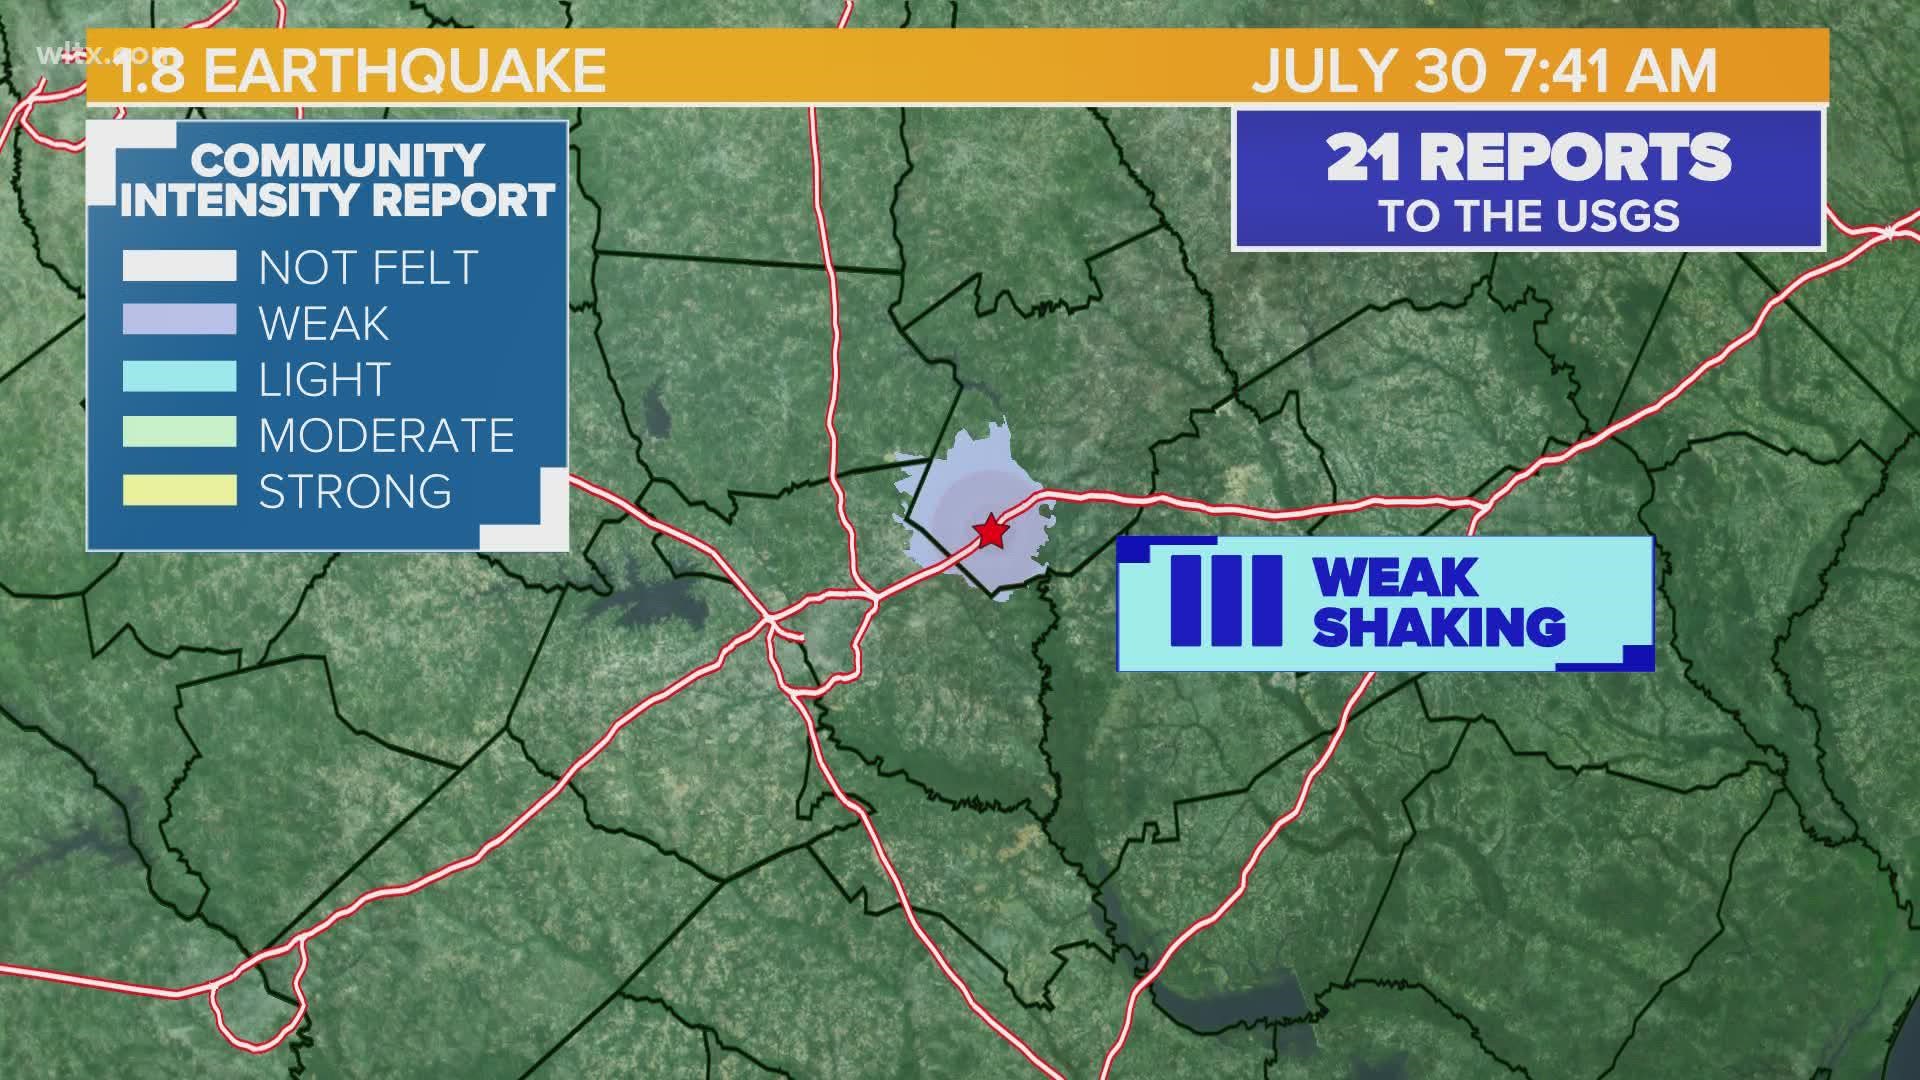 A small rumble on Saturday morning now brings the earthquake count to 71 for the Lugoff and Elgin regions of Kershaw County - a count that began 215 days earlier.